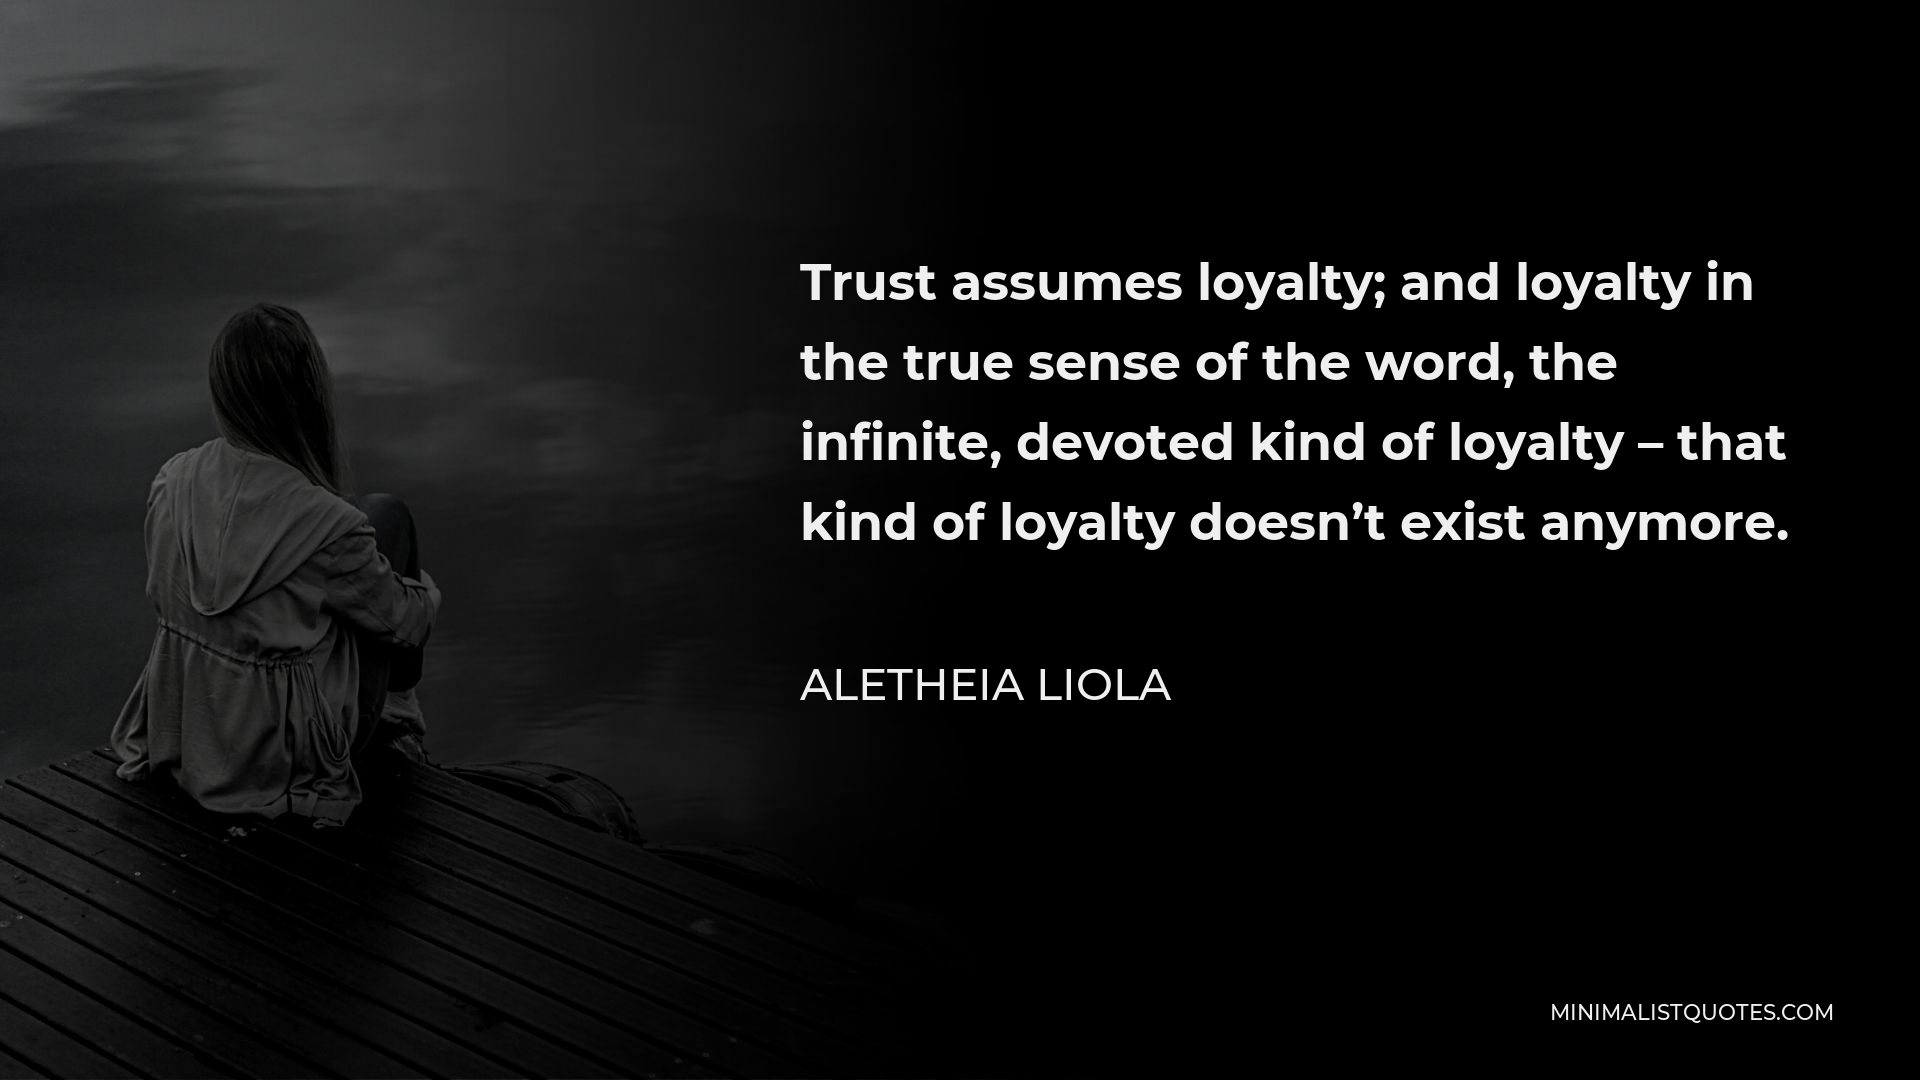 Aletheia Liola Quote - Trust assumes loyalty; and loyalty in the true sense of the word, the infinite, devoted kind of loyalty – that kind of loyalty doesn’t exist anymore.